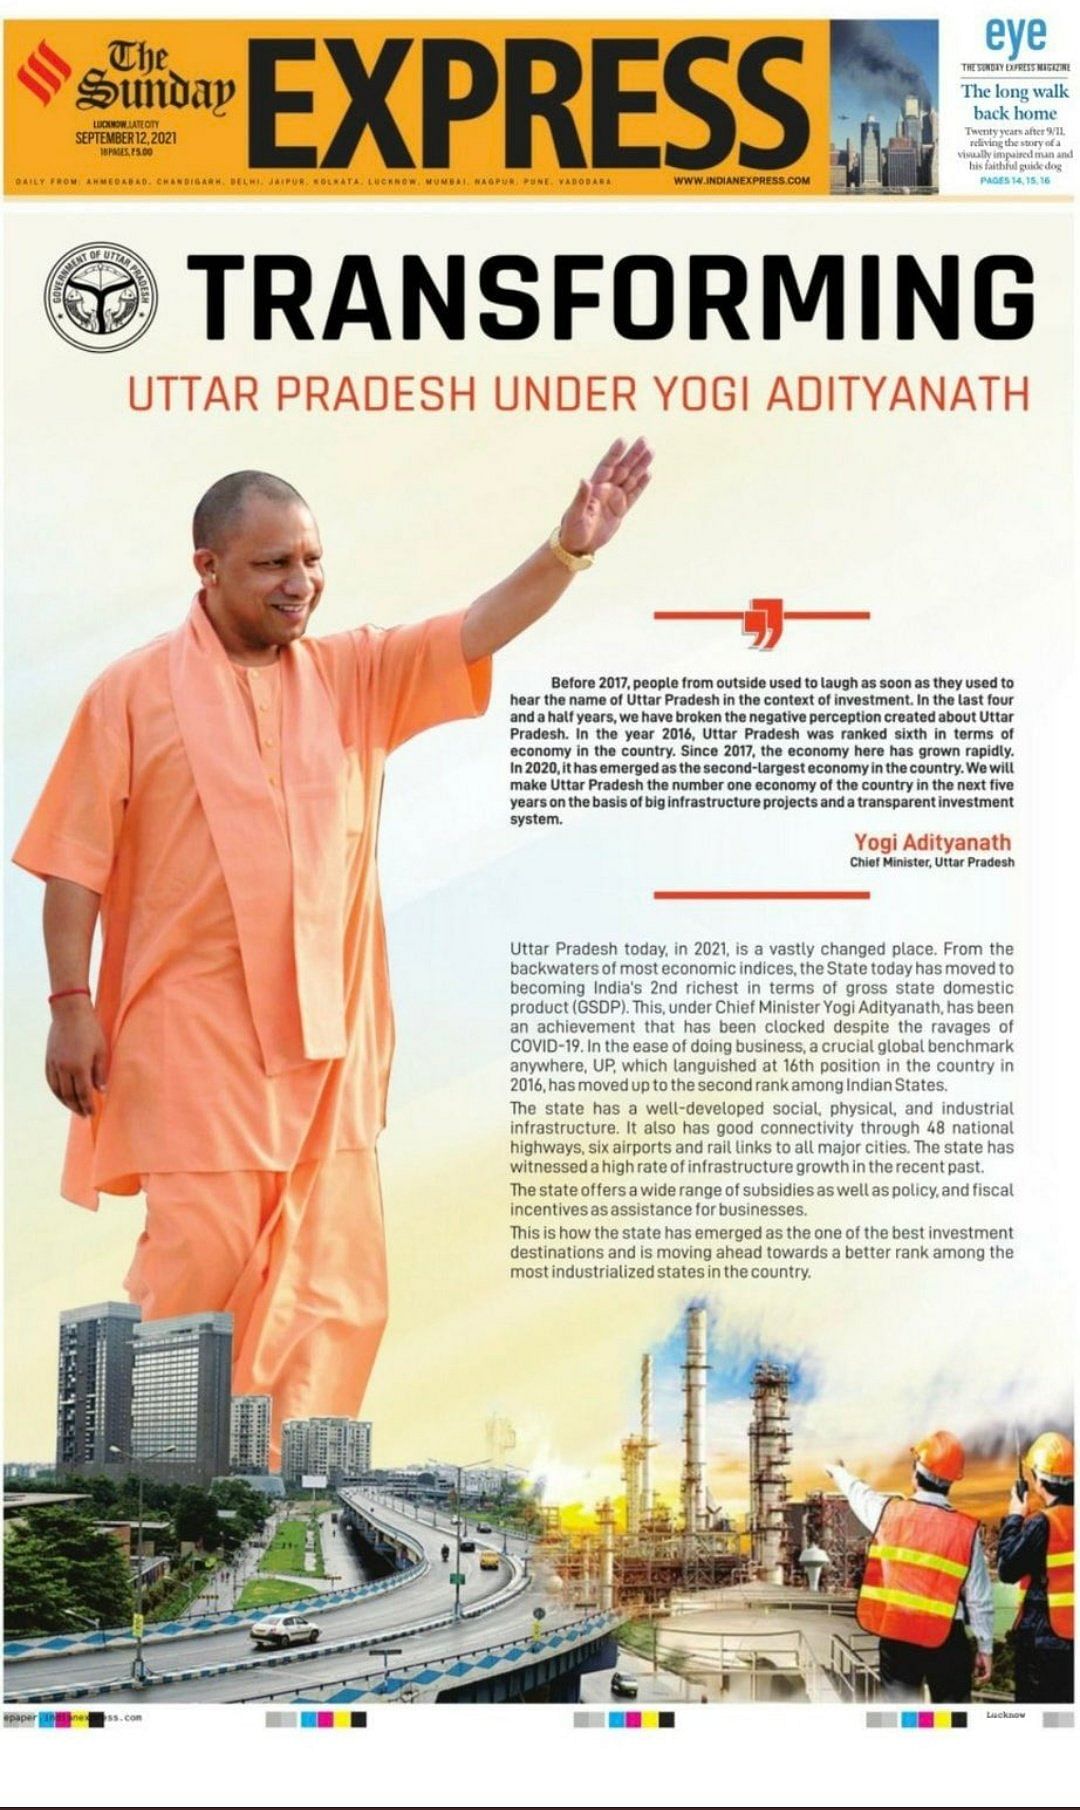 The UP government's ad has a cluster of photos that shows Kolkata's Maa flyover and other buildings in its vicinity.